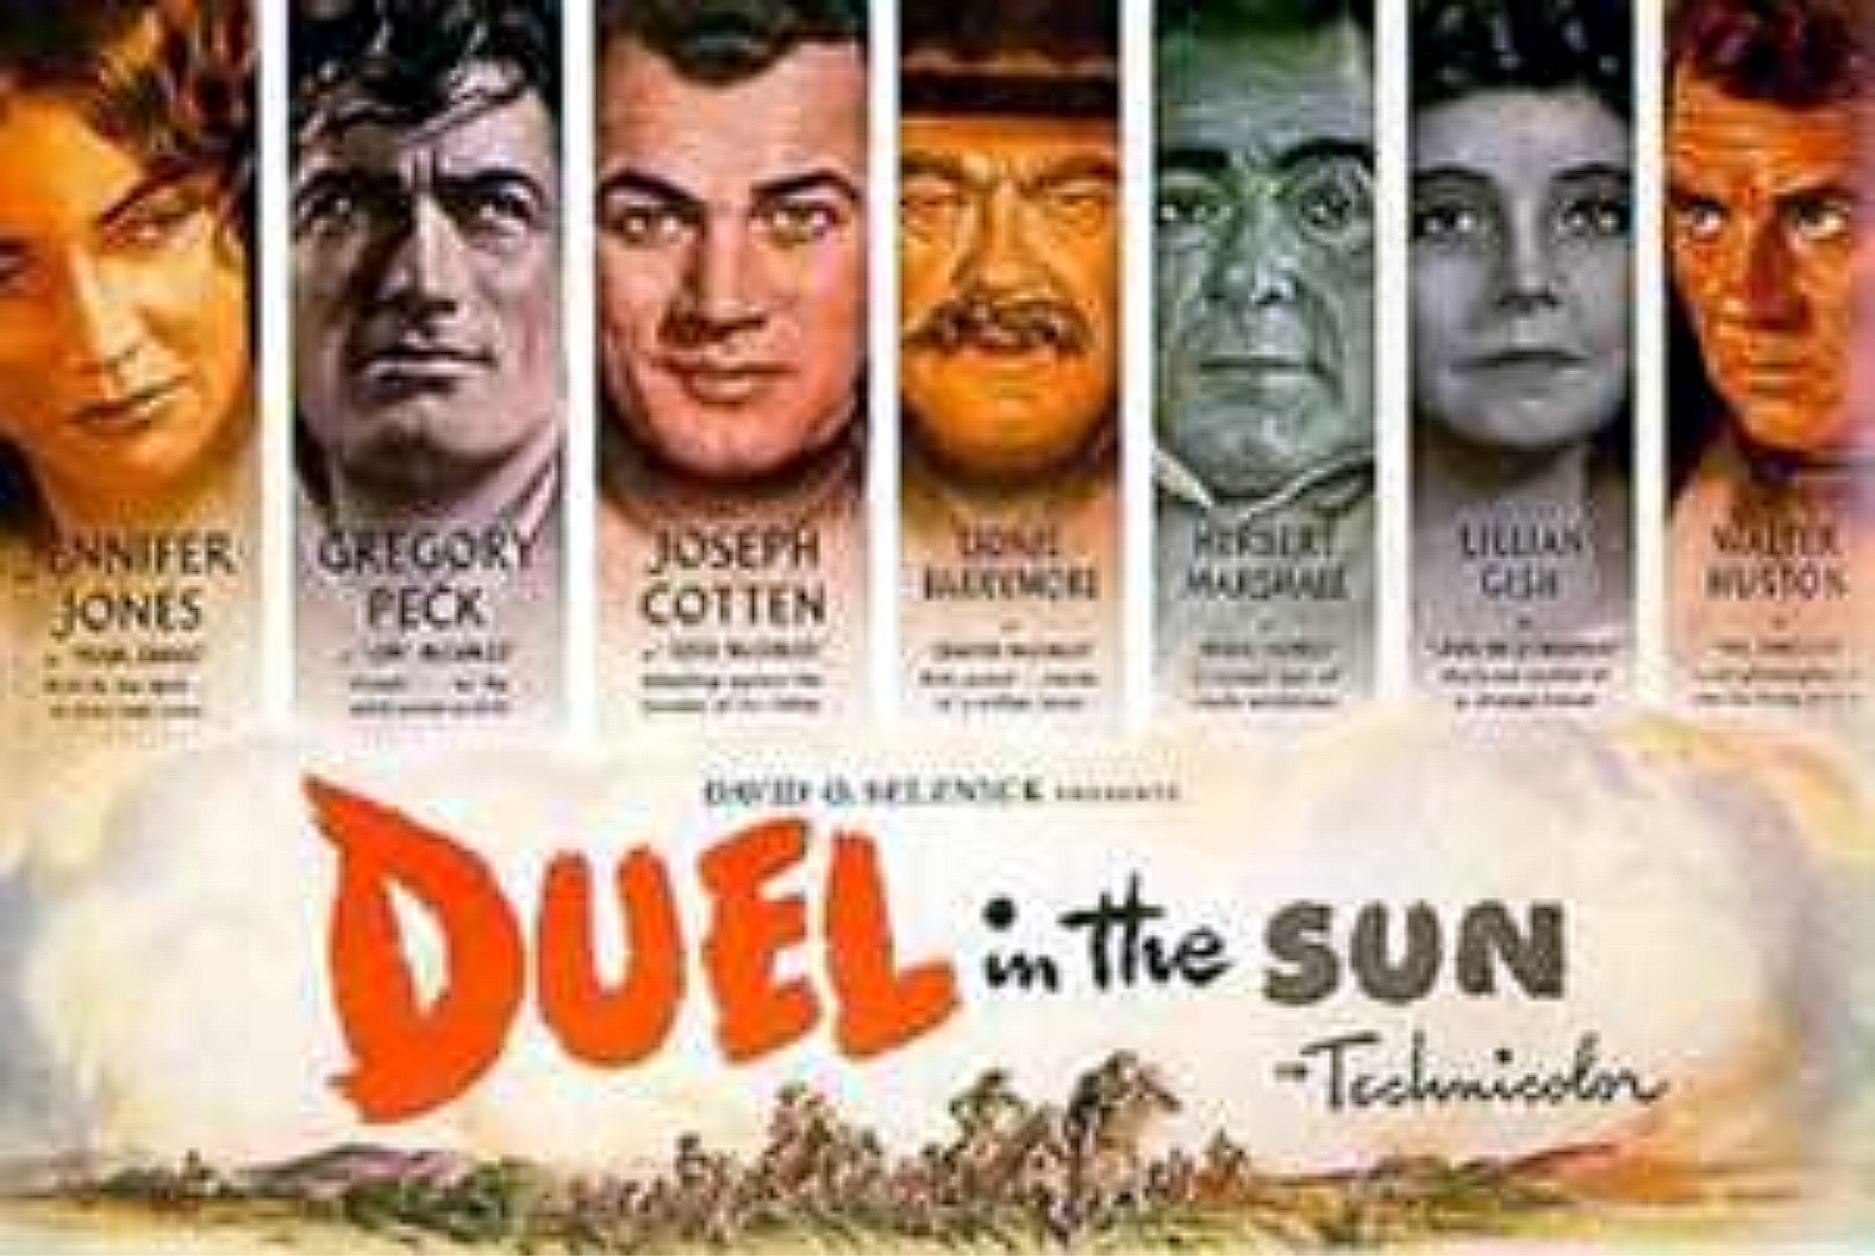 Duel in the Sun poster